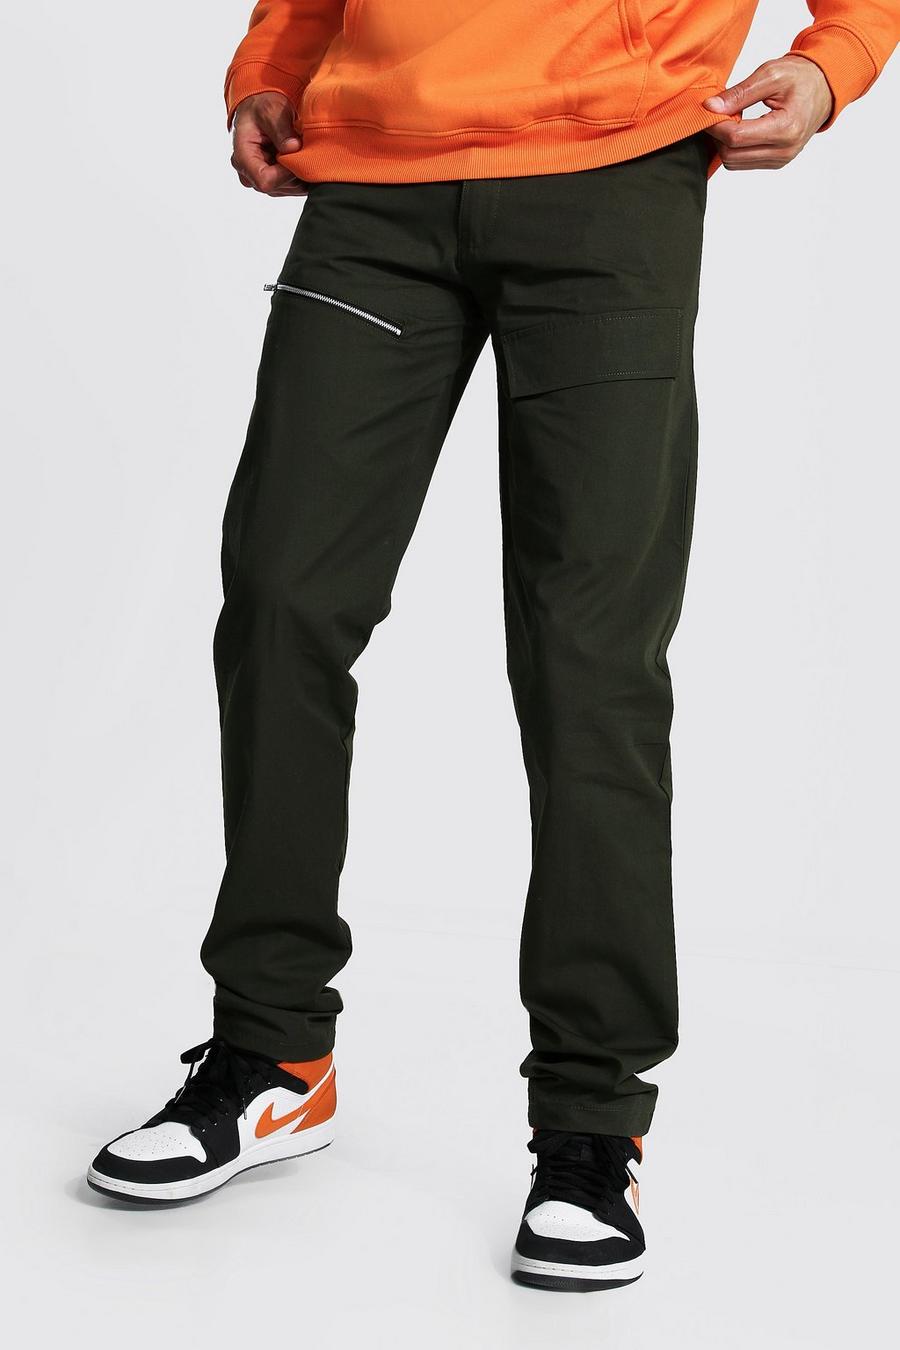 Khaki Tall Straight Leg Pants With Front Pockets image number 1